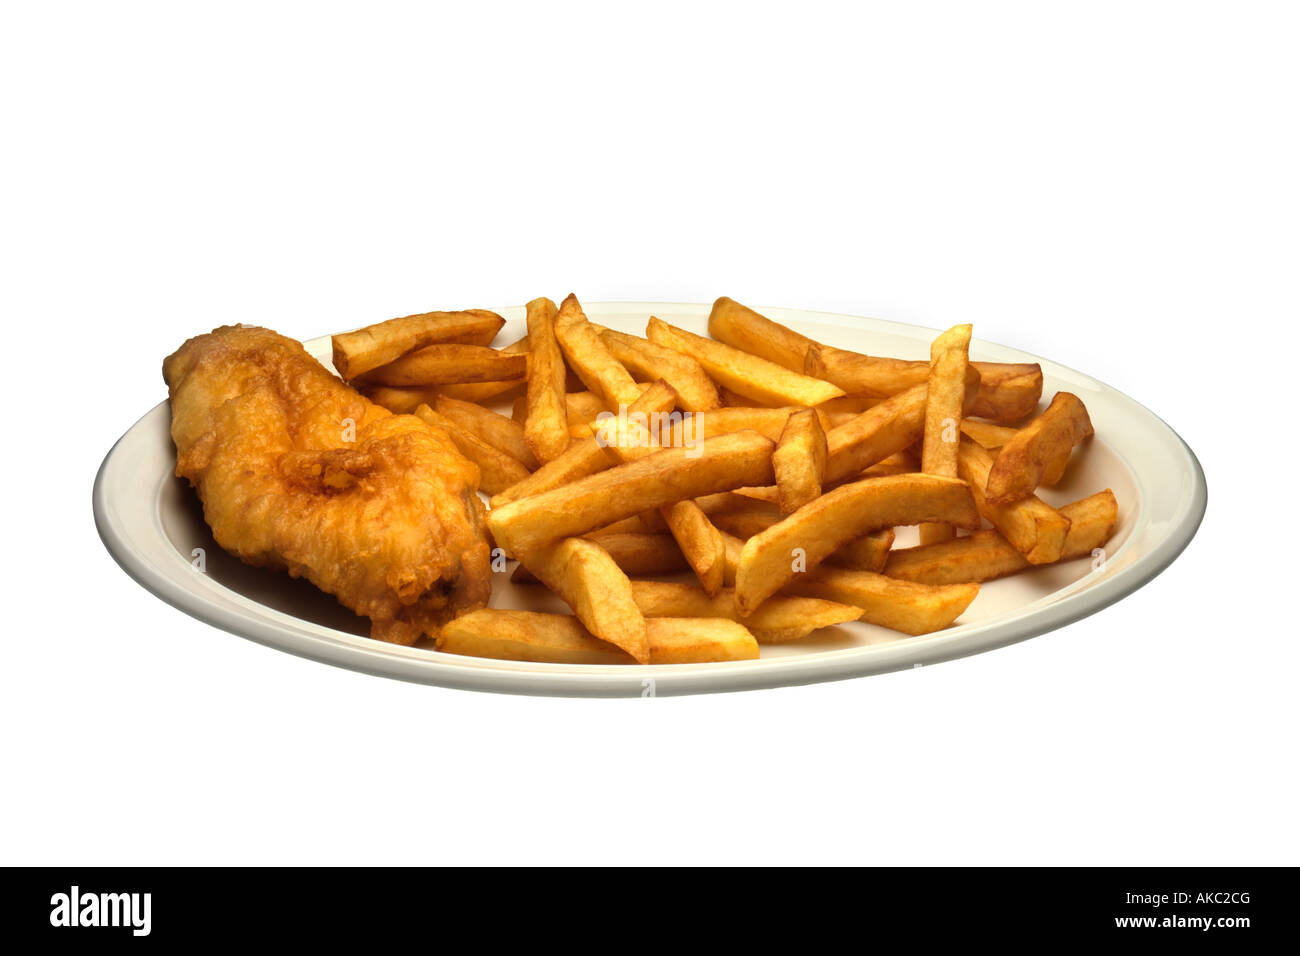 A PLATE OF TRADITIONAL FISH AND CHIPS OR COD AND CHIPS Stock Photo